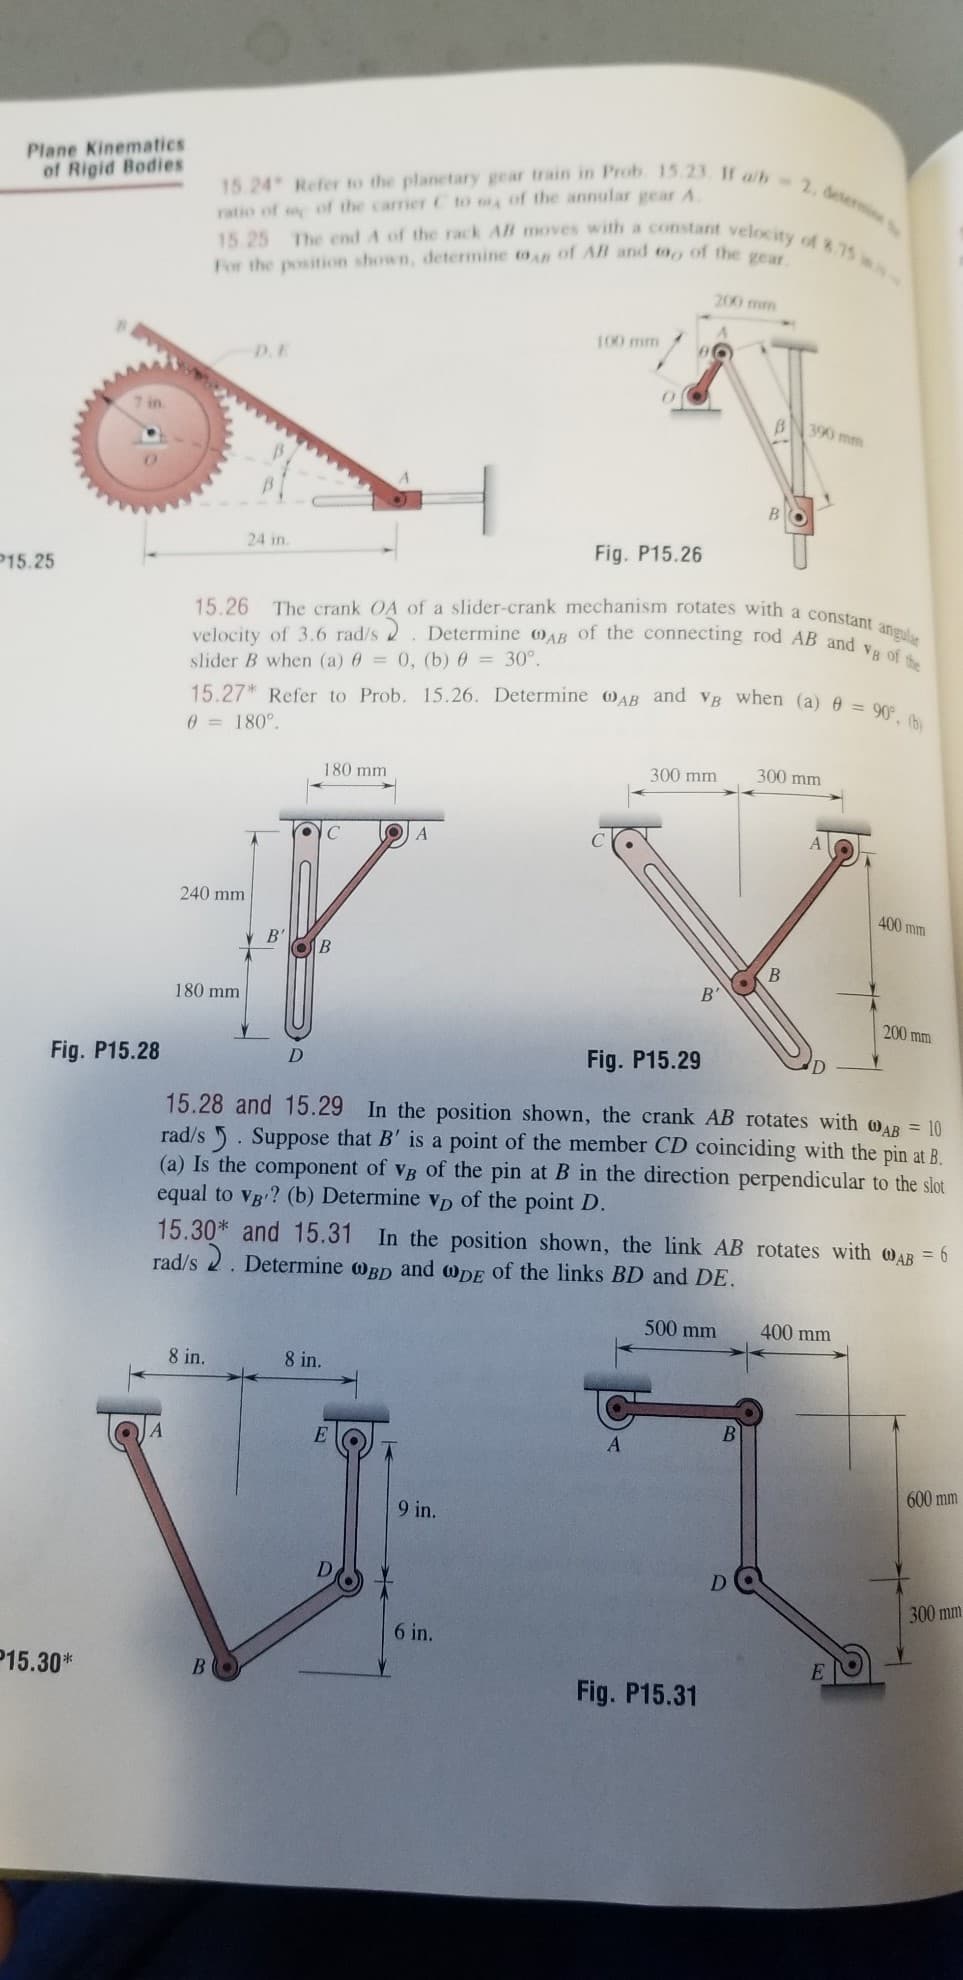 Determine oAB of the connecting rod AB and vB of the
15 24 Refer to the planetary gear train in Prob 15.23. If alb 2. determi
15 25 The end A of the rack AB moves with a constant velocity of 8.75 s-
15.26 The crank OA of a slider-crank mechanism rotates with a constant angular
15.27* Refer to Prob. 15.26. Determine AB and VB when (a) 0 = 90, (b)
Plane Kinematics
of Rigid Bodies
ratio of of the carrier C to of the annular gearA
For the position shown, determine on of AB and to,, of the
200 mm
100 mm
D.E
BN 390 mm
24 in
Fig. P15.26
P15.25
velocity of 3.6 rad/s 2
slider B when (a) 6 = 0, (b) 0 = 30°.
0 = 180°.
180 mm
300 mm
300 mm
240 mm
400 mm
B'
B'
180 mm
200 mm
D
Fig. P15.29
Fig. P15.28
15.28 and 15.29 In the position shown, the crank AB rotates with WAB = 10
rad/s 5. Suppose that B' is a point of the member CD coinciding with the pin at B.
(a) Is the component of vB of the pin at B in the direction perpendicular to the slot
equal to Vg ? (b) Determine vD of the point D.
15.30* and 15.31
rad/s 2. Determine wBD and wDE of the links BD and DE.
In the position shown, the link AB rotates with oAB = 6
500 mm
400 mm
8 in.
8 in.
E
A
600 mm
9 in.
D
D.
300 mm
6 in.
P15.30*
BO
Fig. P15.31
